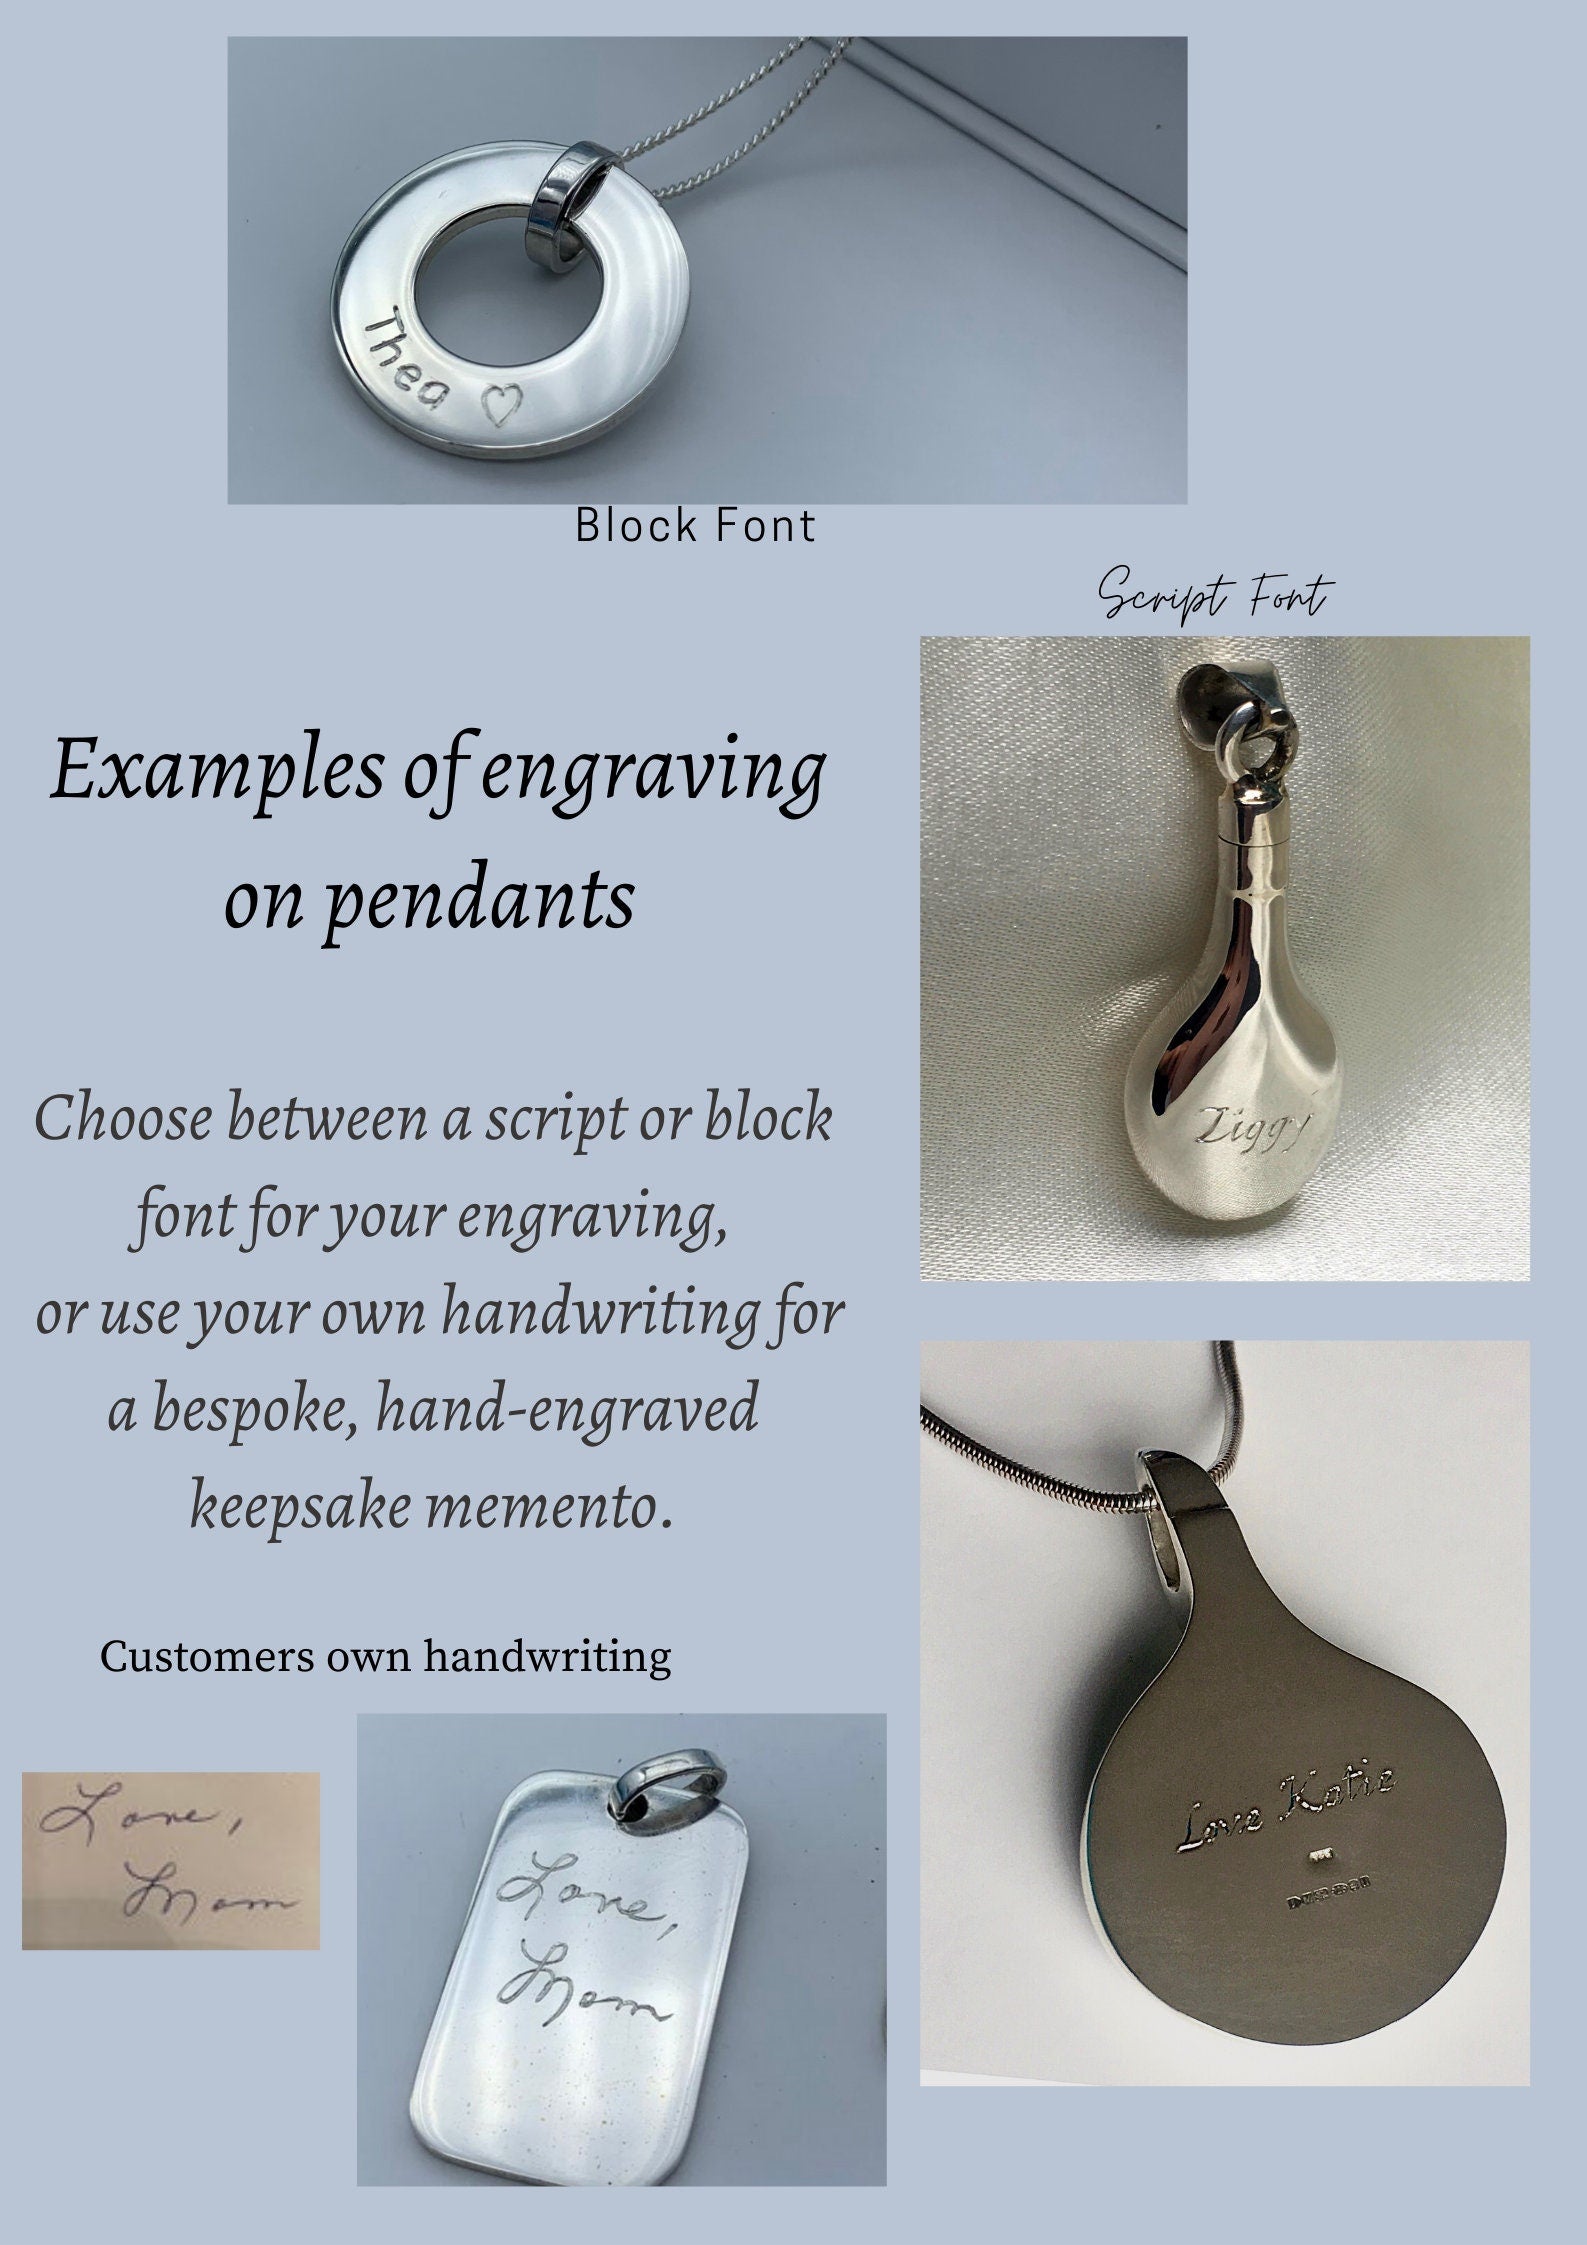 Add-on personalization service, hand engraving, actual handwriting, handwriting message, personalized jewelry, hand personalization service